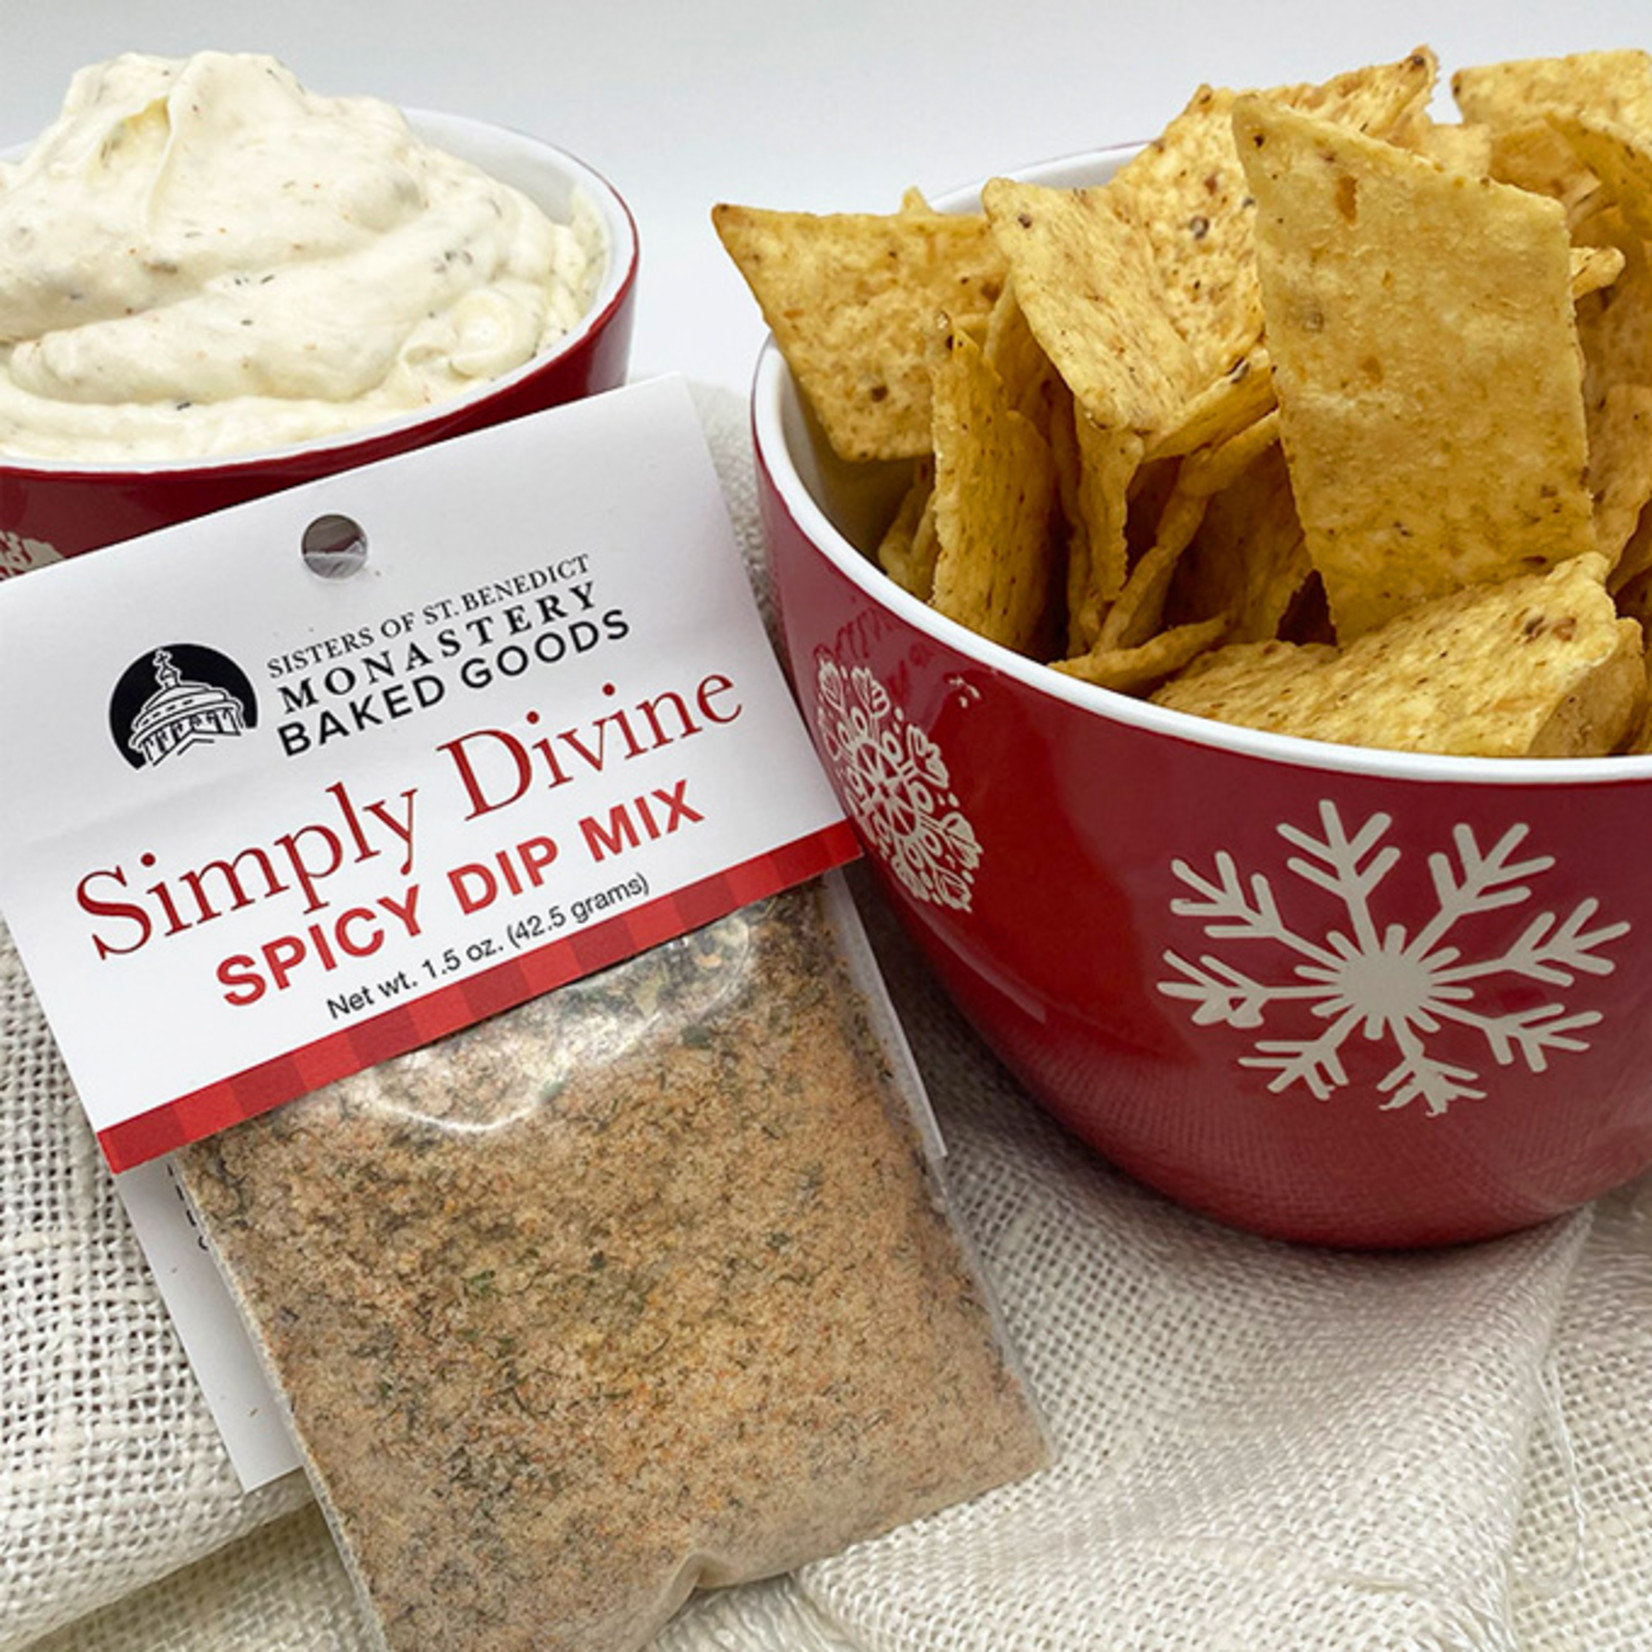 Monastery Baked Goods Sisters of St. Benedict Dip Mix